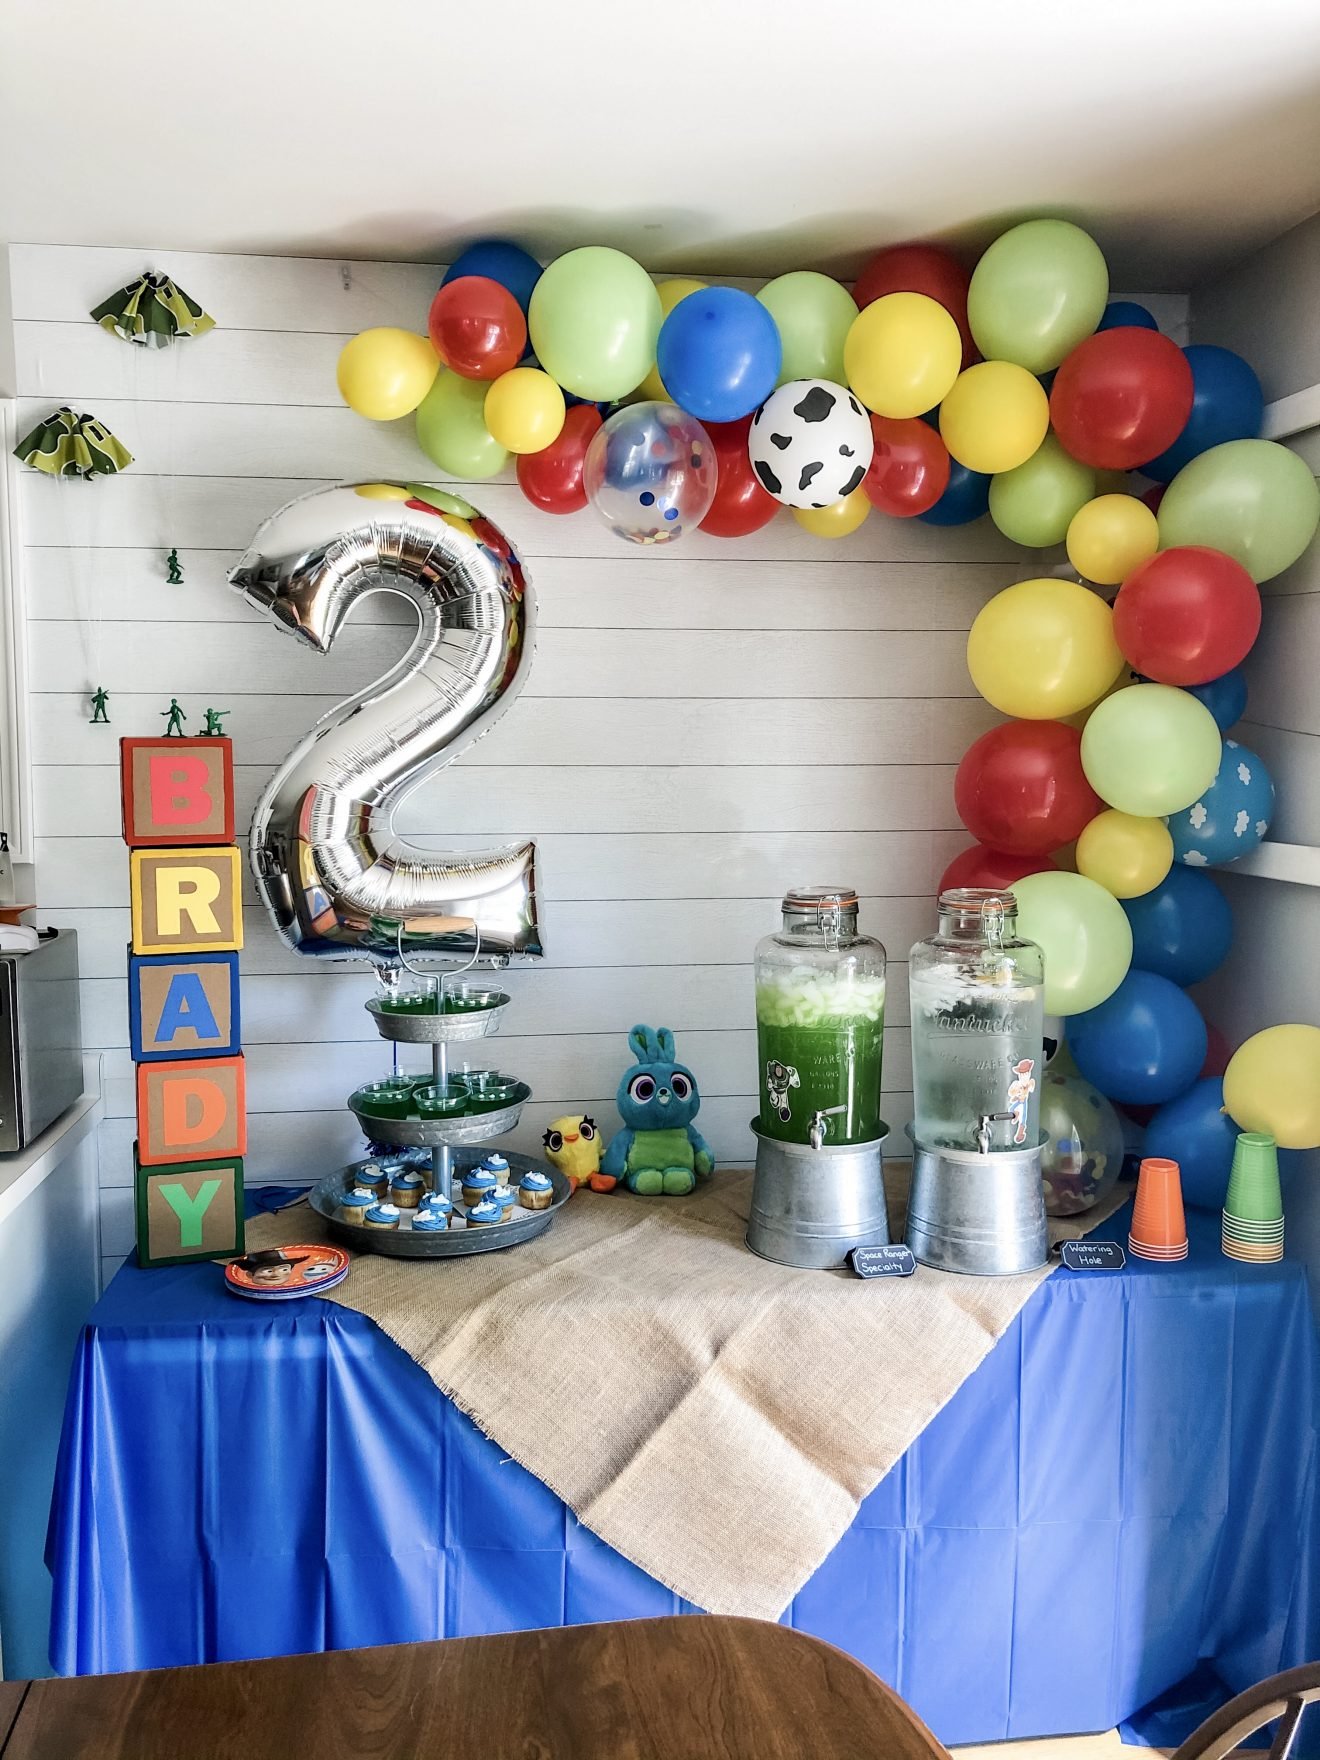 Two year old's toy story themed birthday party